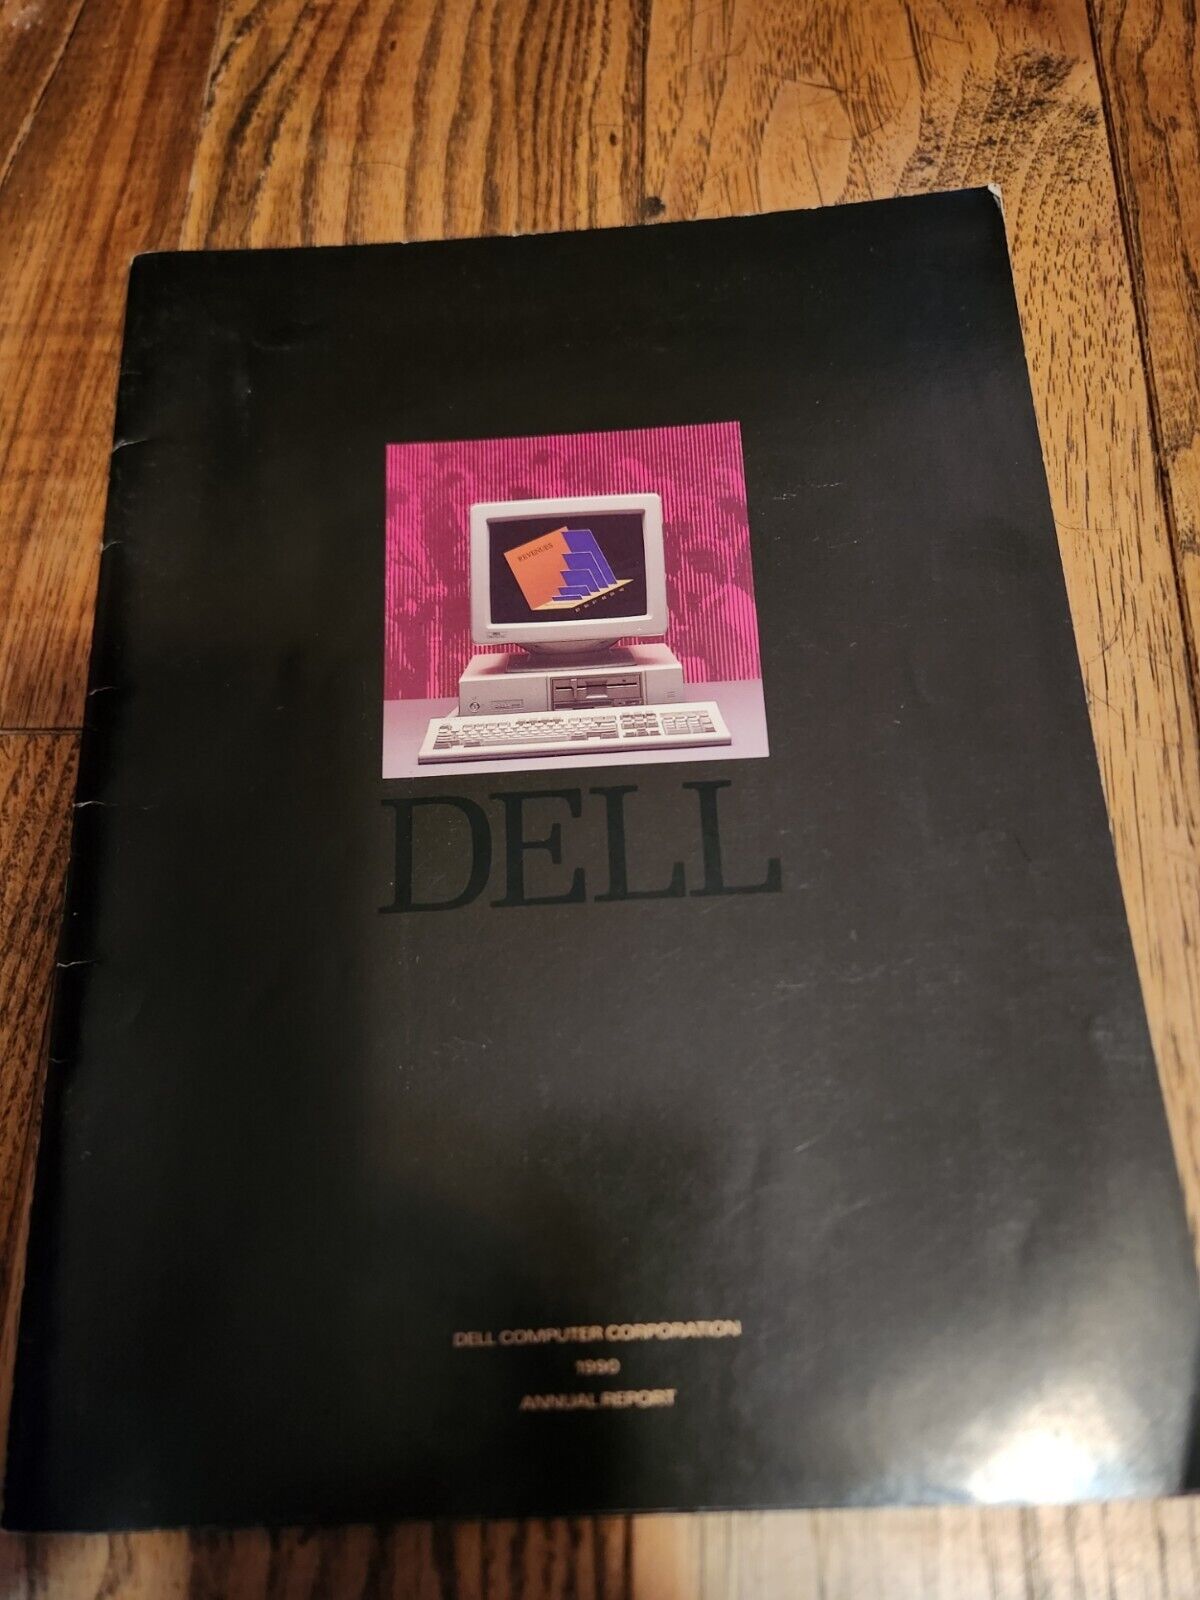 1990 Dell Computer Corporation Annual Report.Collector's item.Rare Find. Vintage